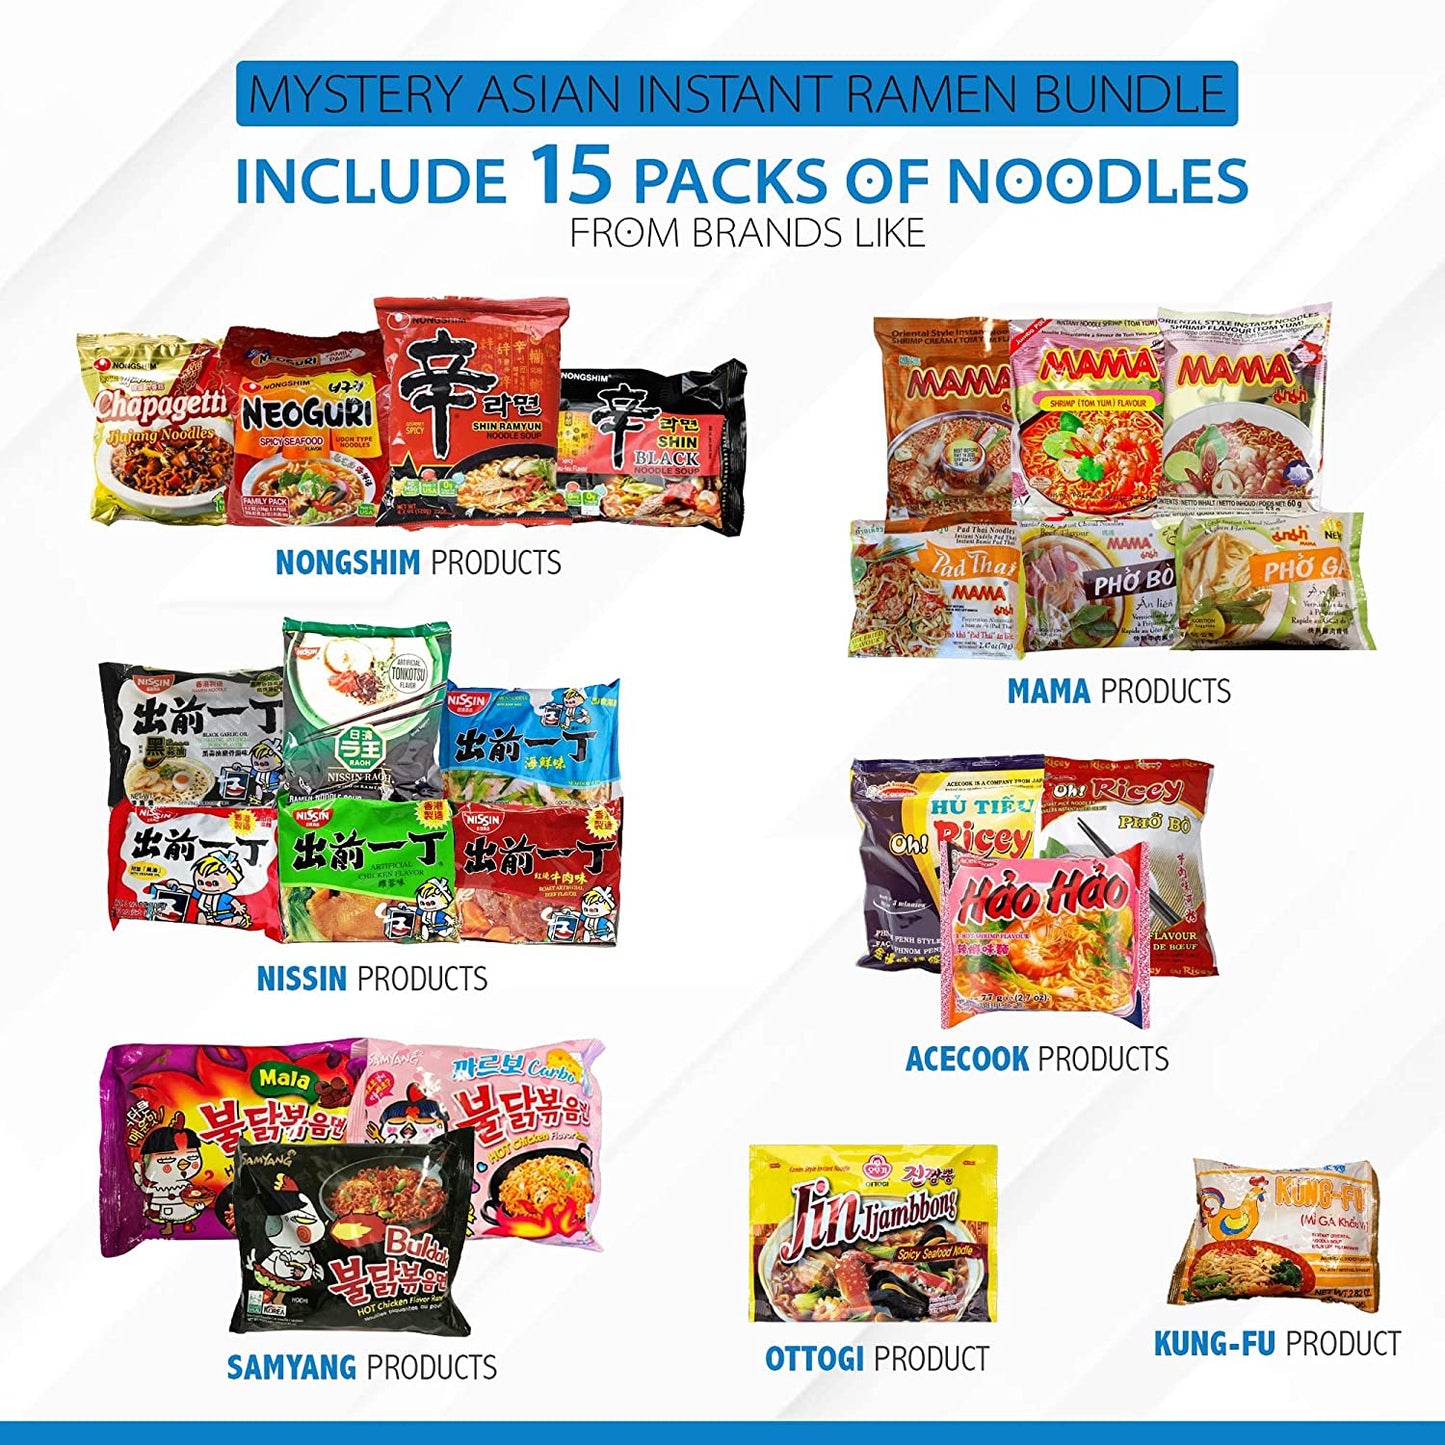 Asian Instant Ramen Variety Pack: 15 Assorted Noodles with Chopsticks & Fortune Cookie Bonus!